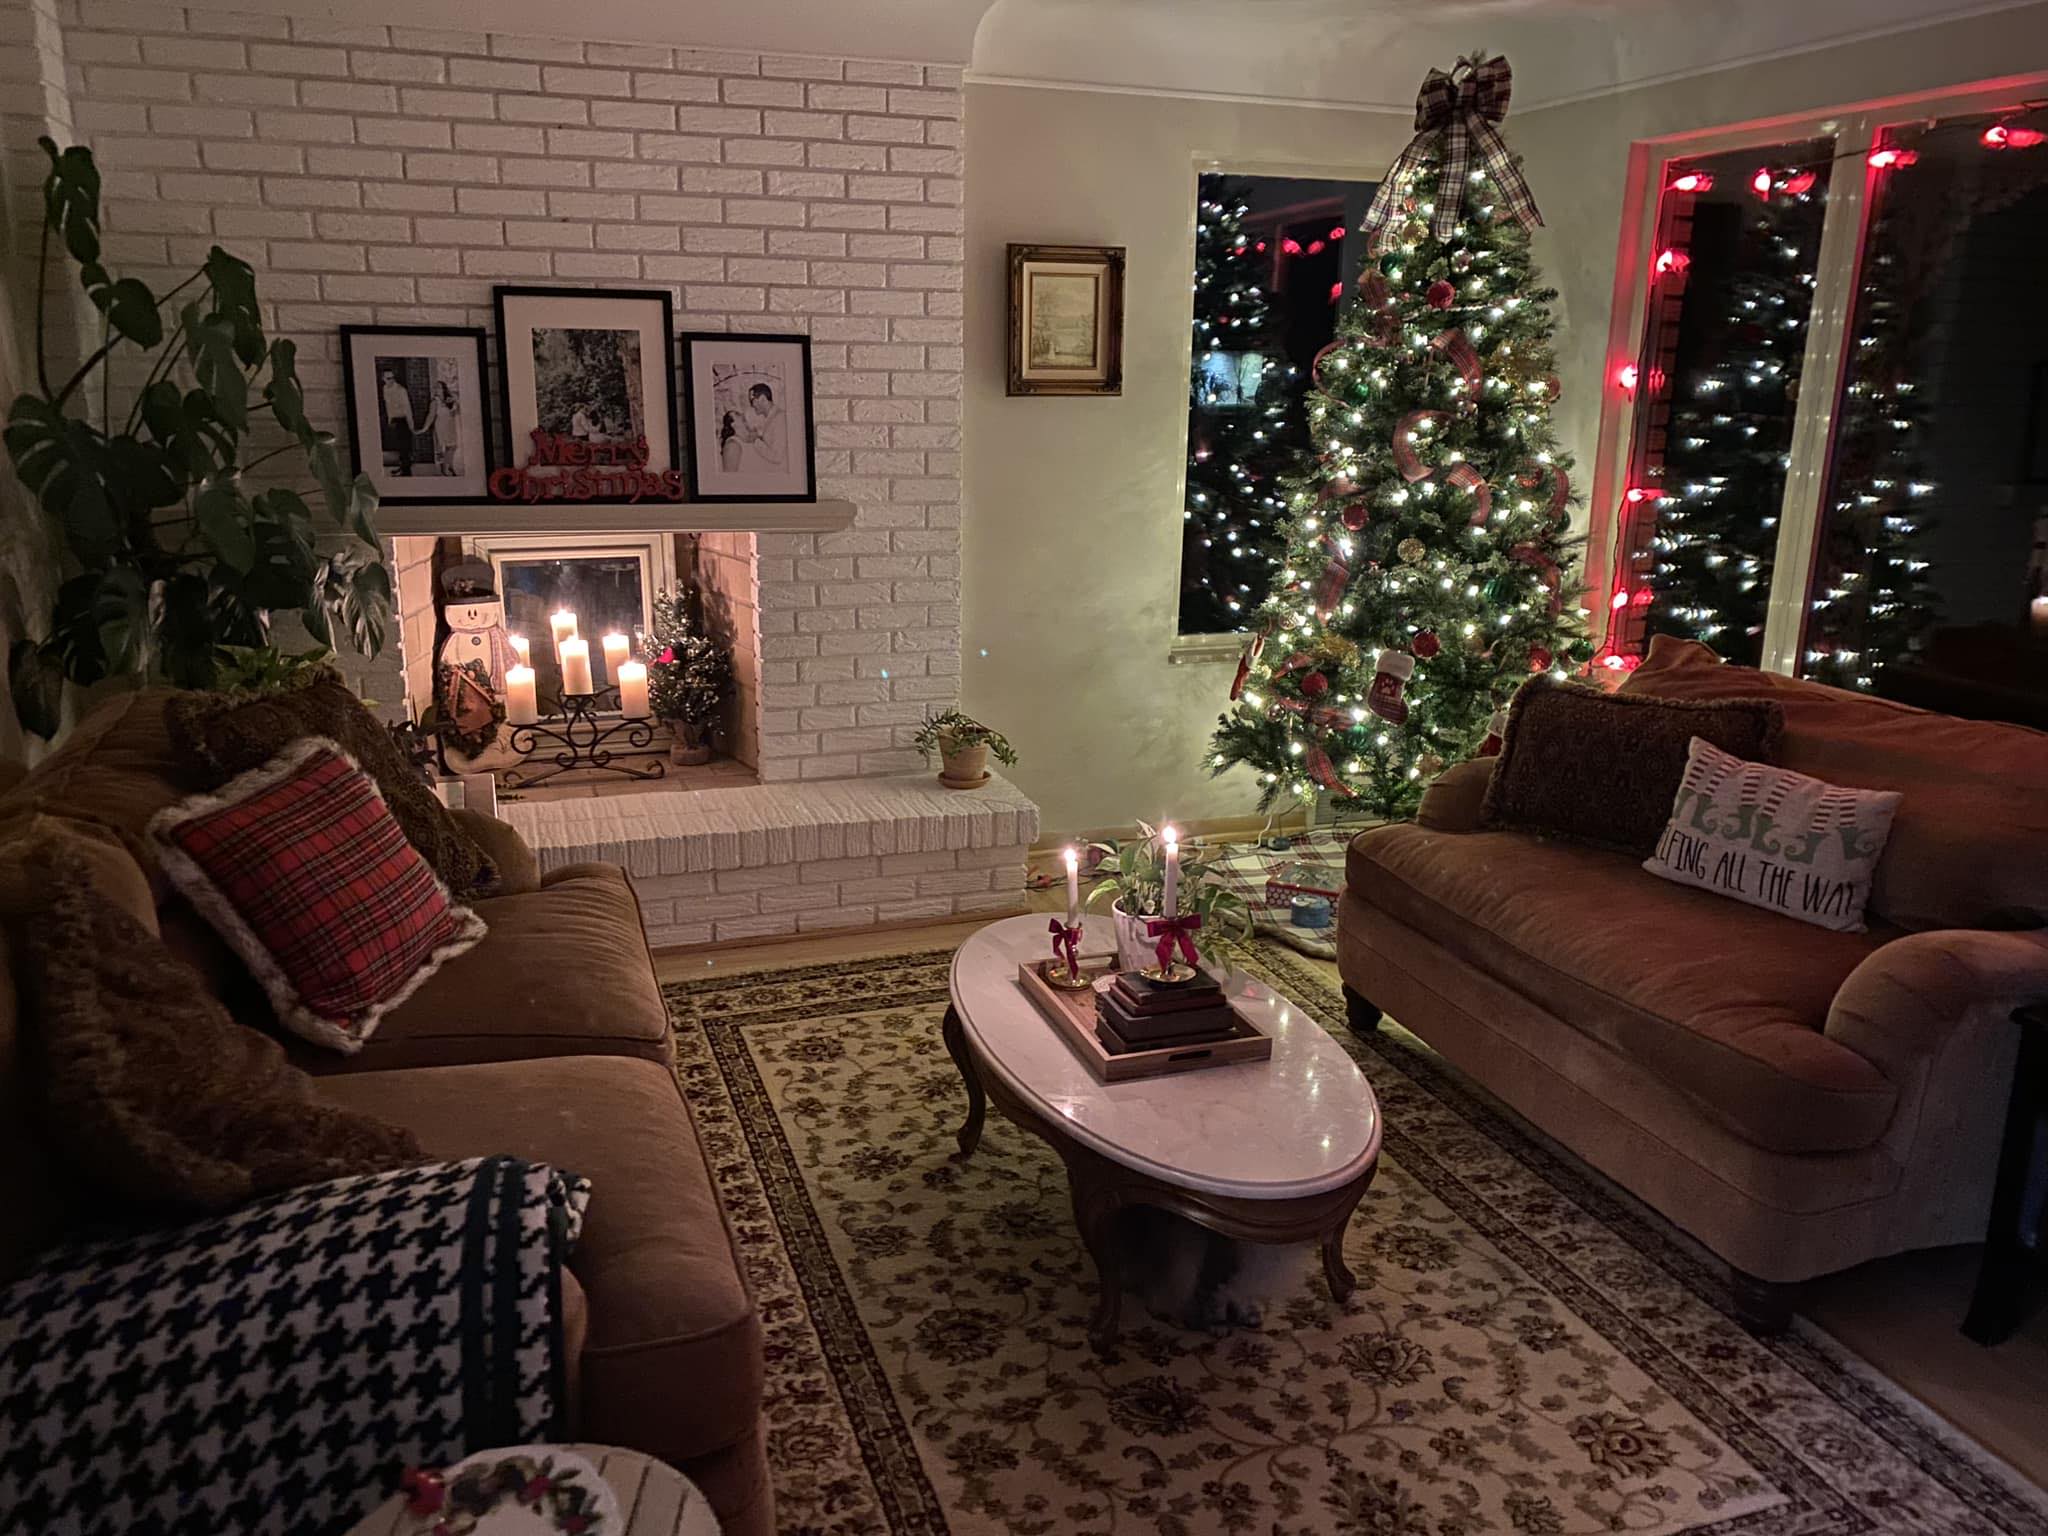 My sitting room, decorated for Christmas